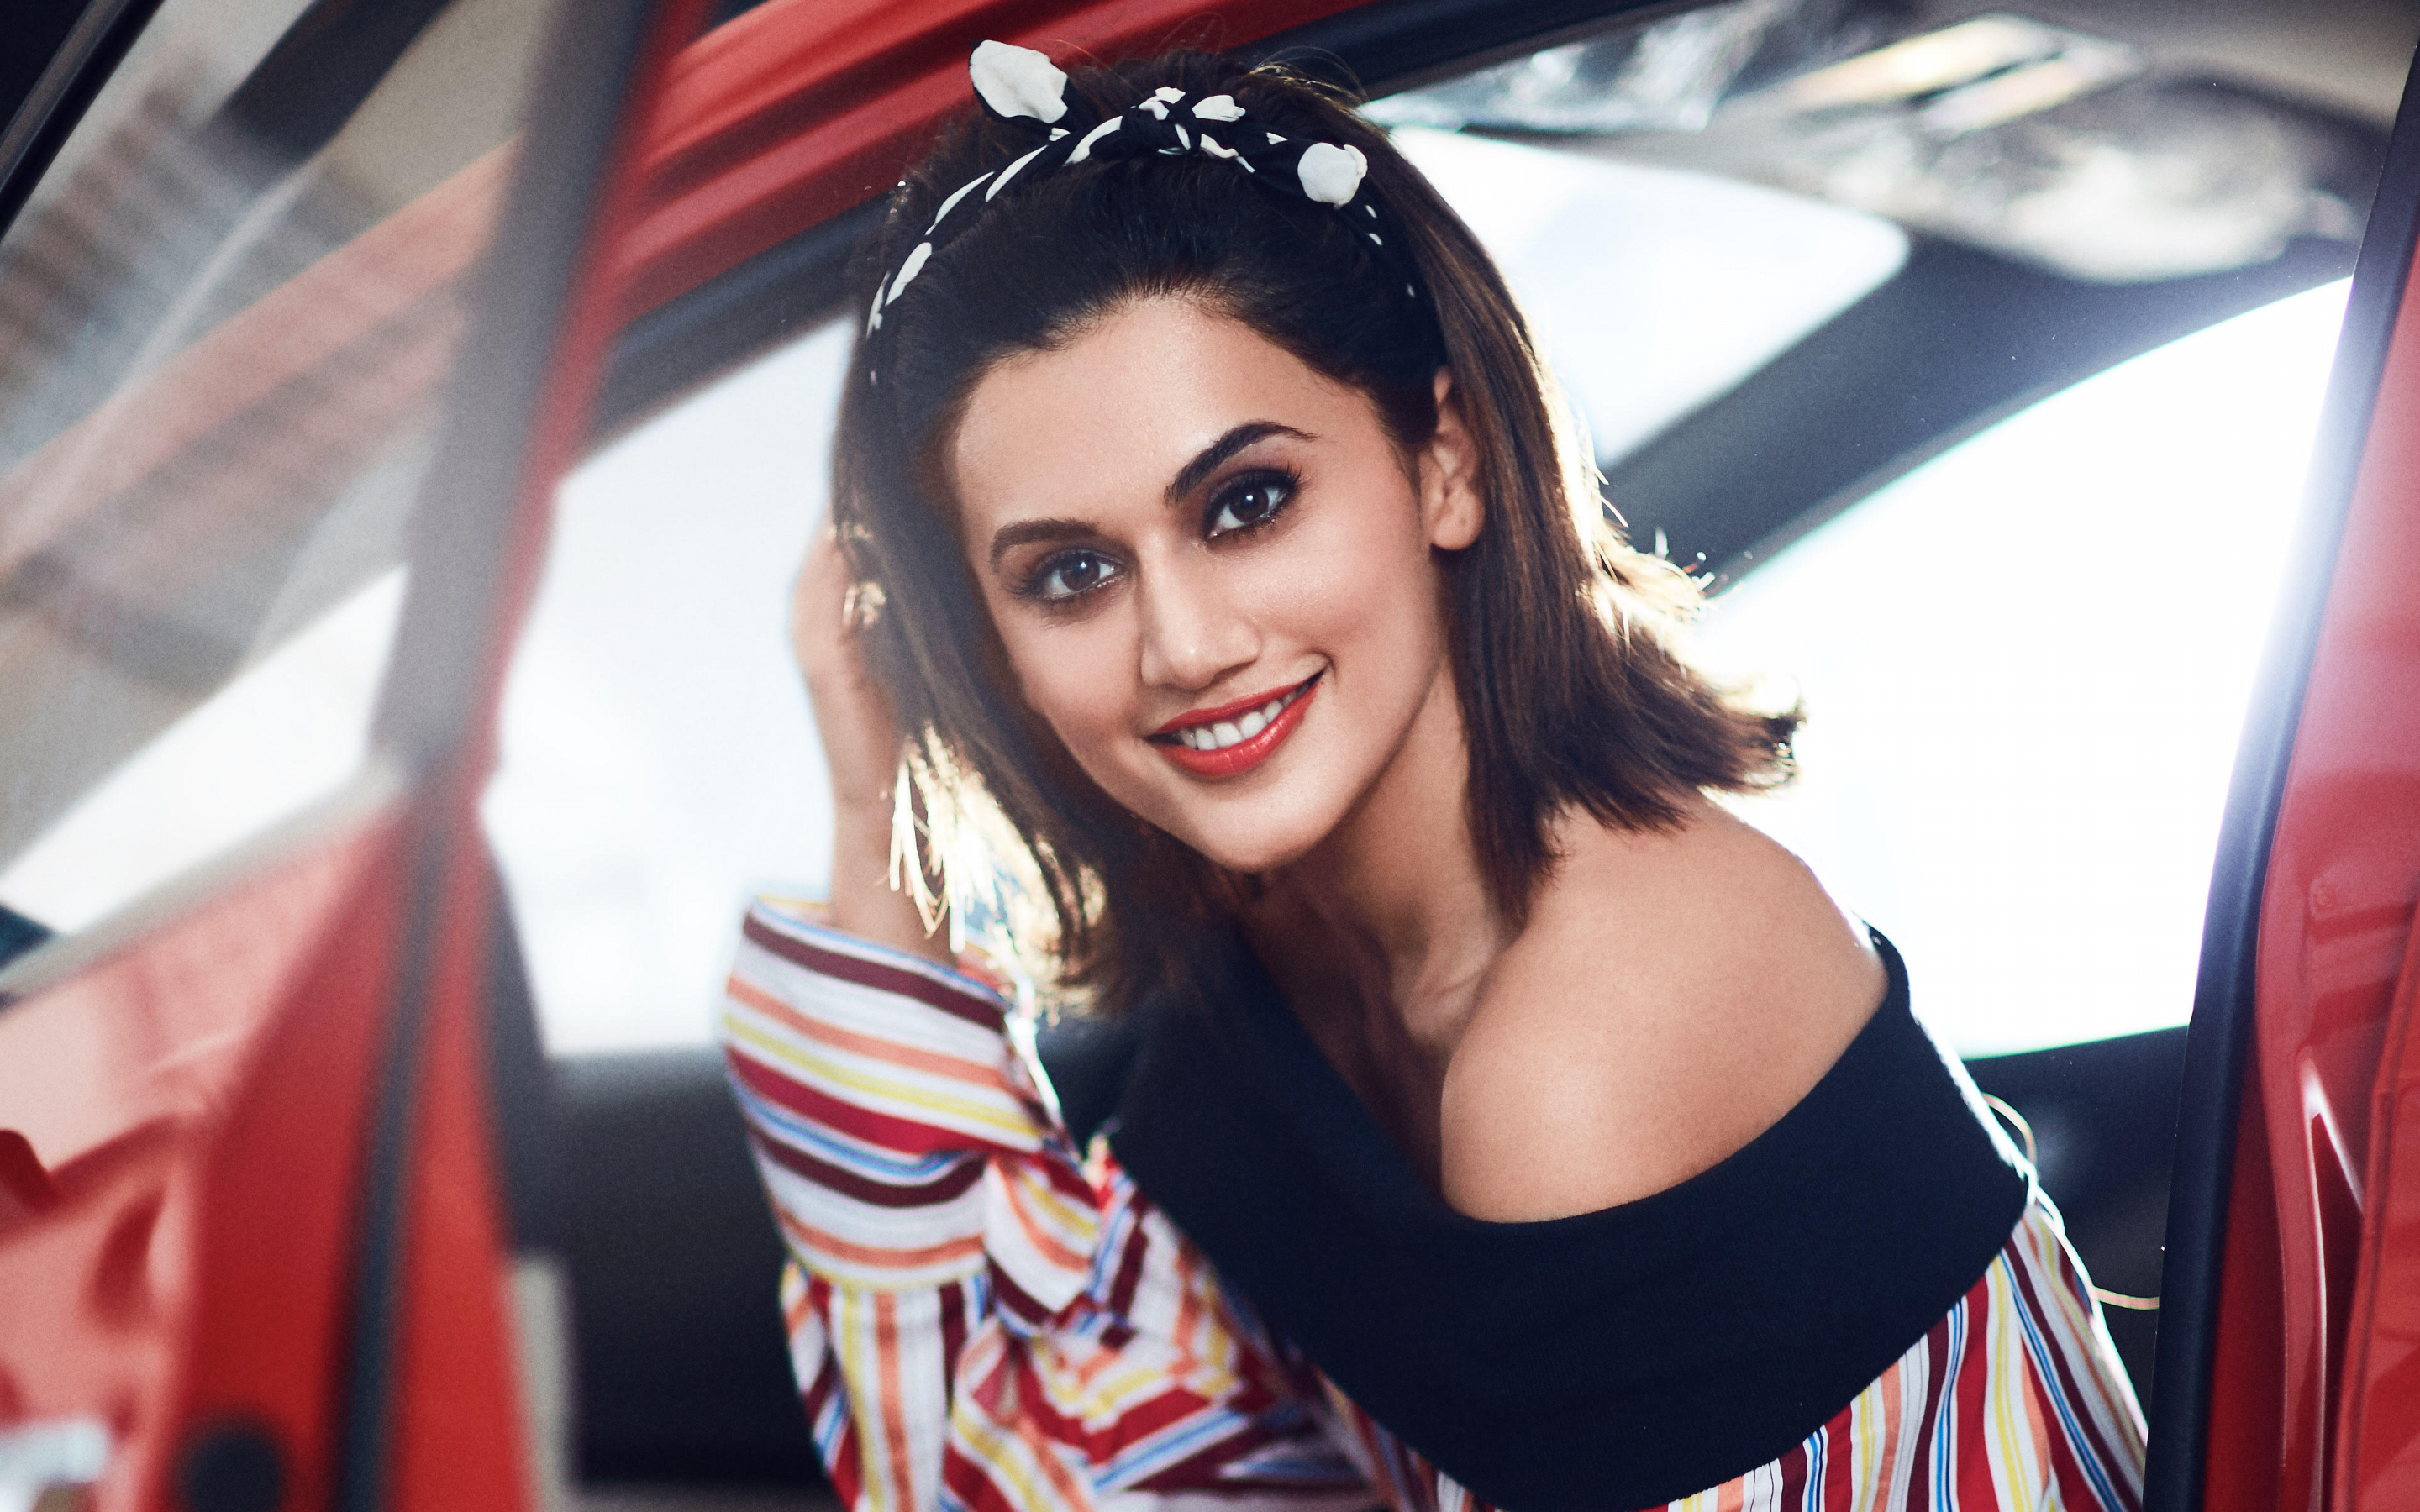 Taapsee Pannu, pretty, actress, smile, 2880x1800 wallpaper